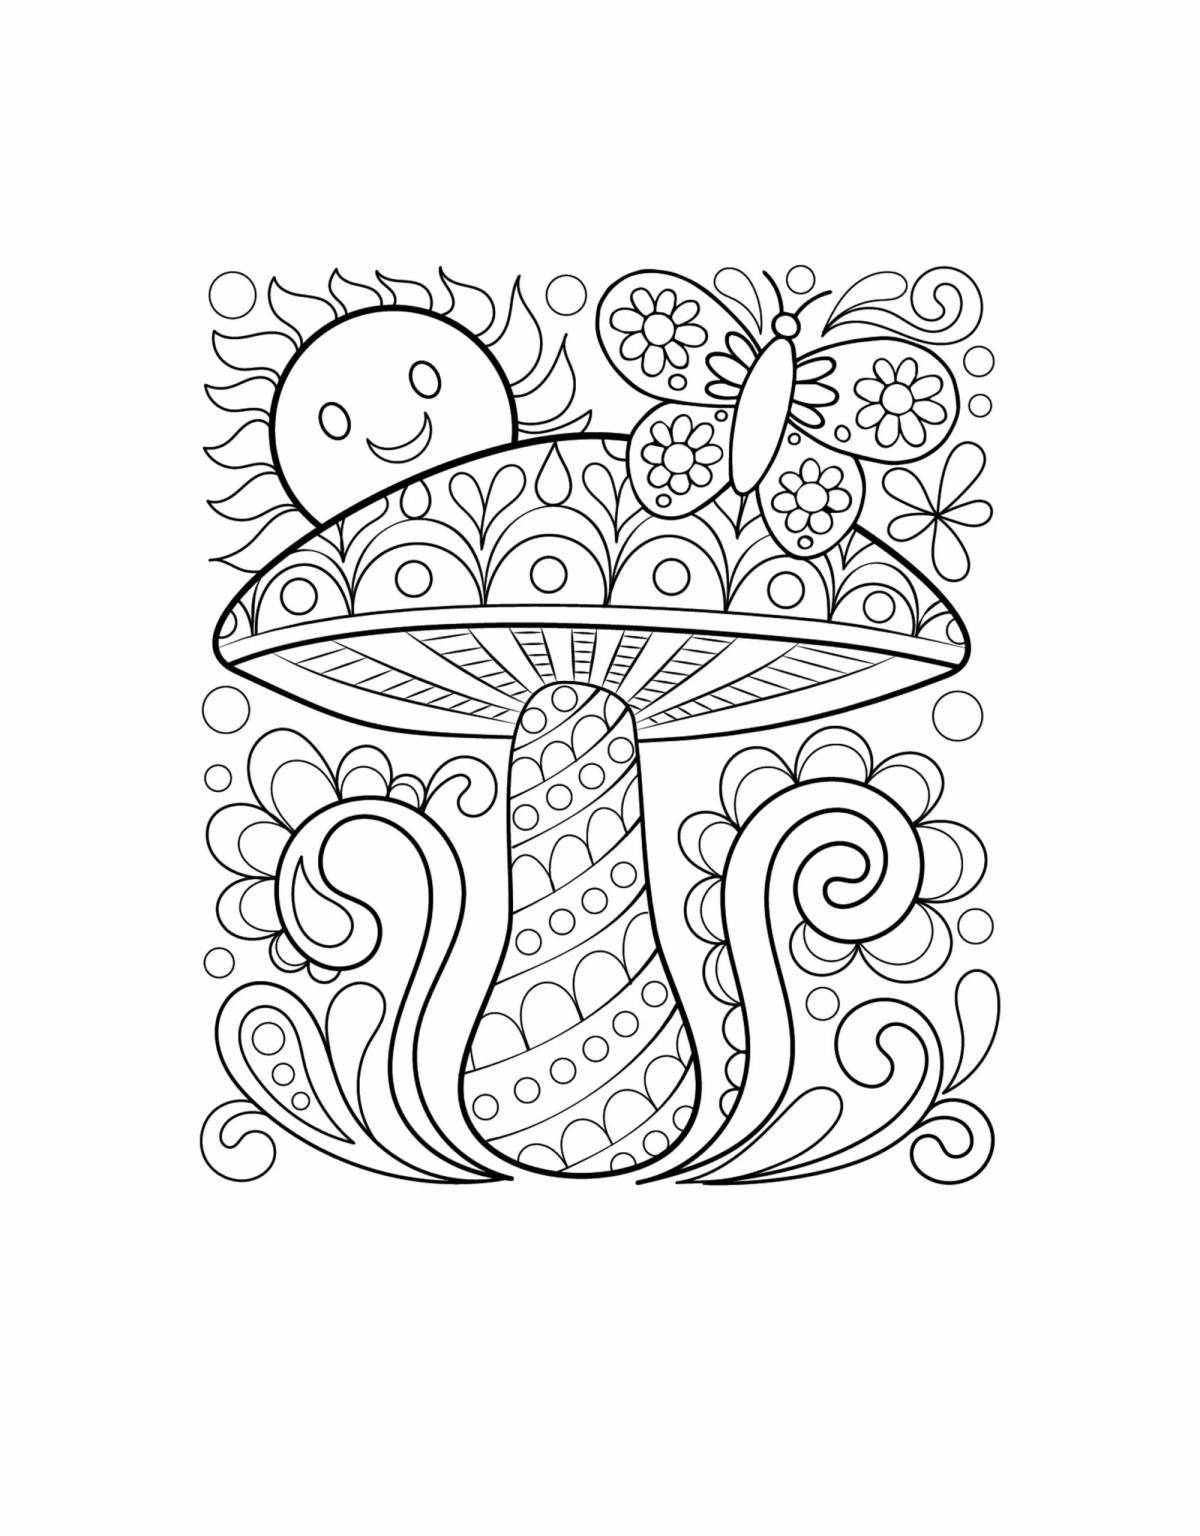 Exciting psychological anti-stress coloring book